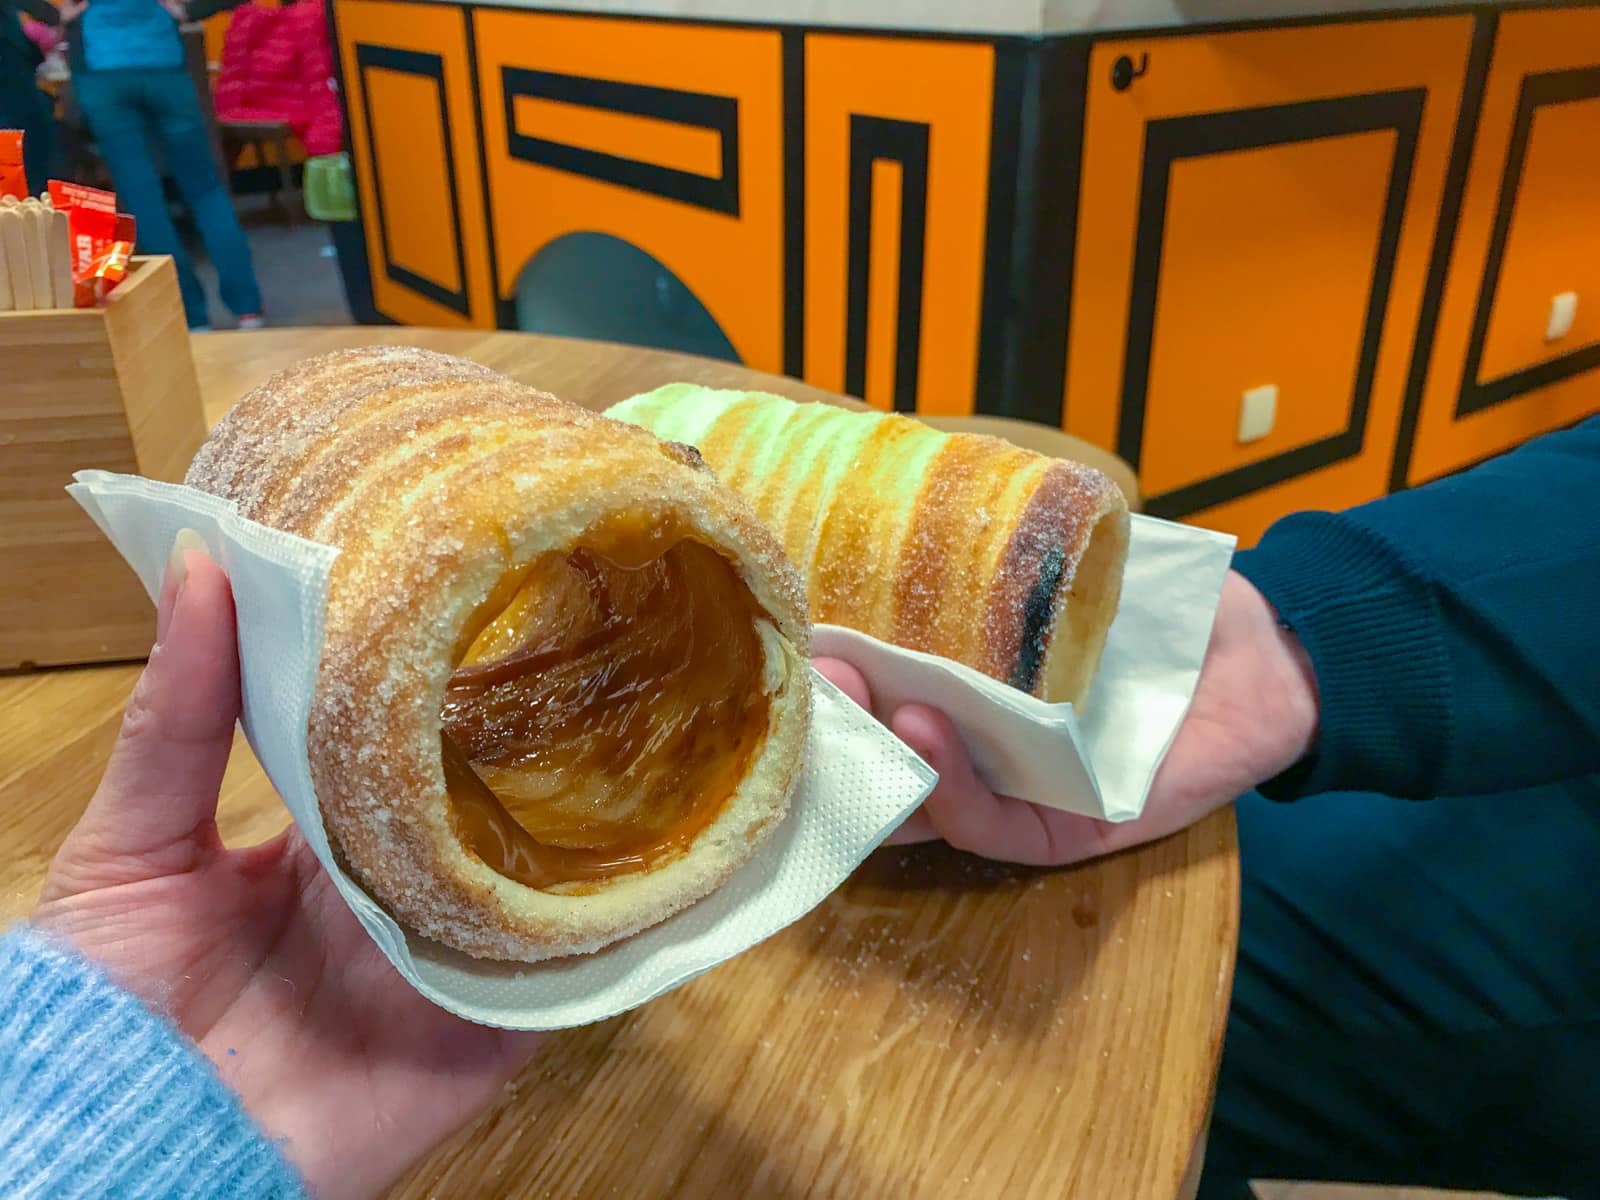 Cylindrical, tube-shaped cinnamon pastry snacks held by two people over a table